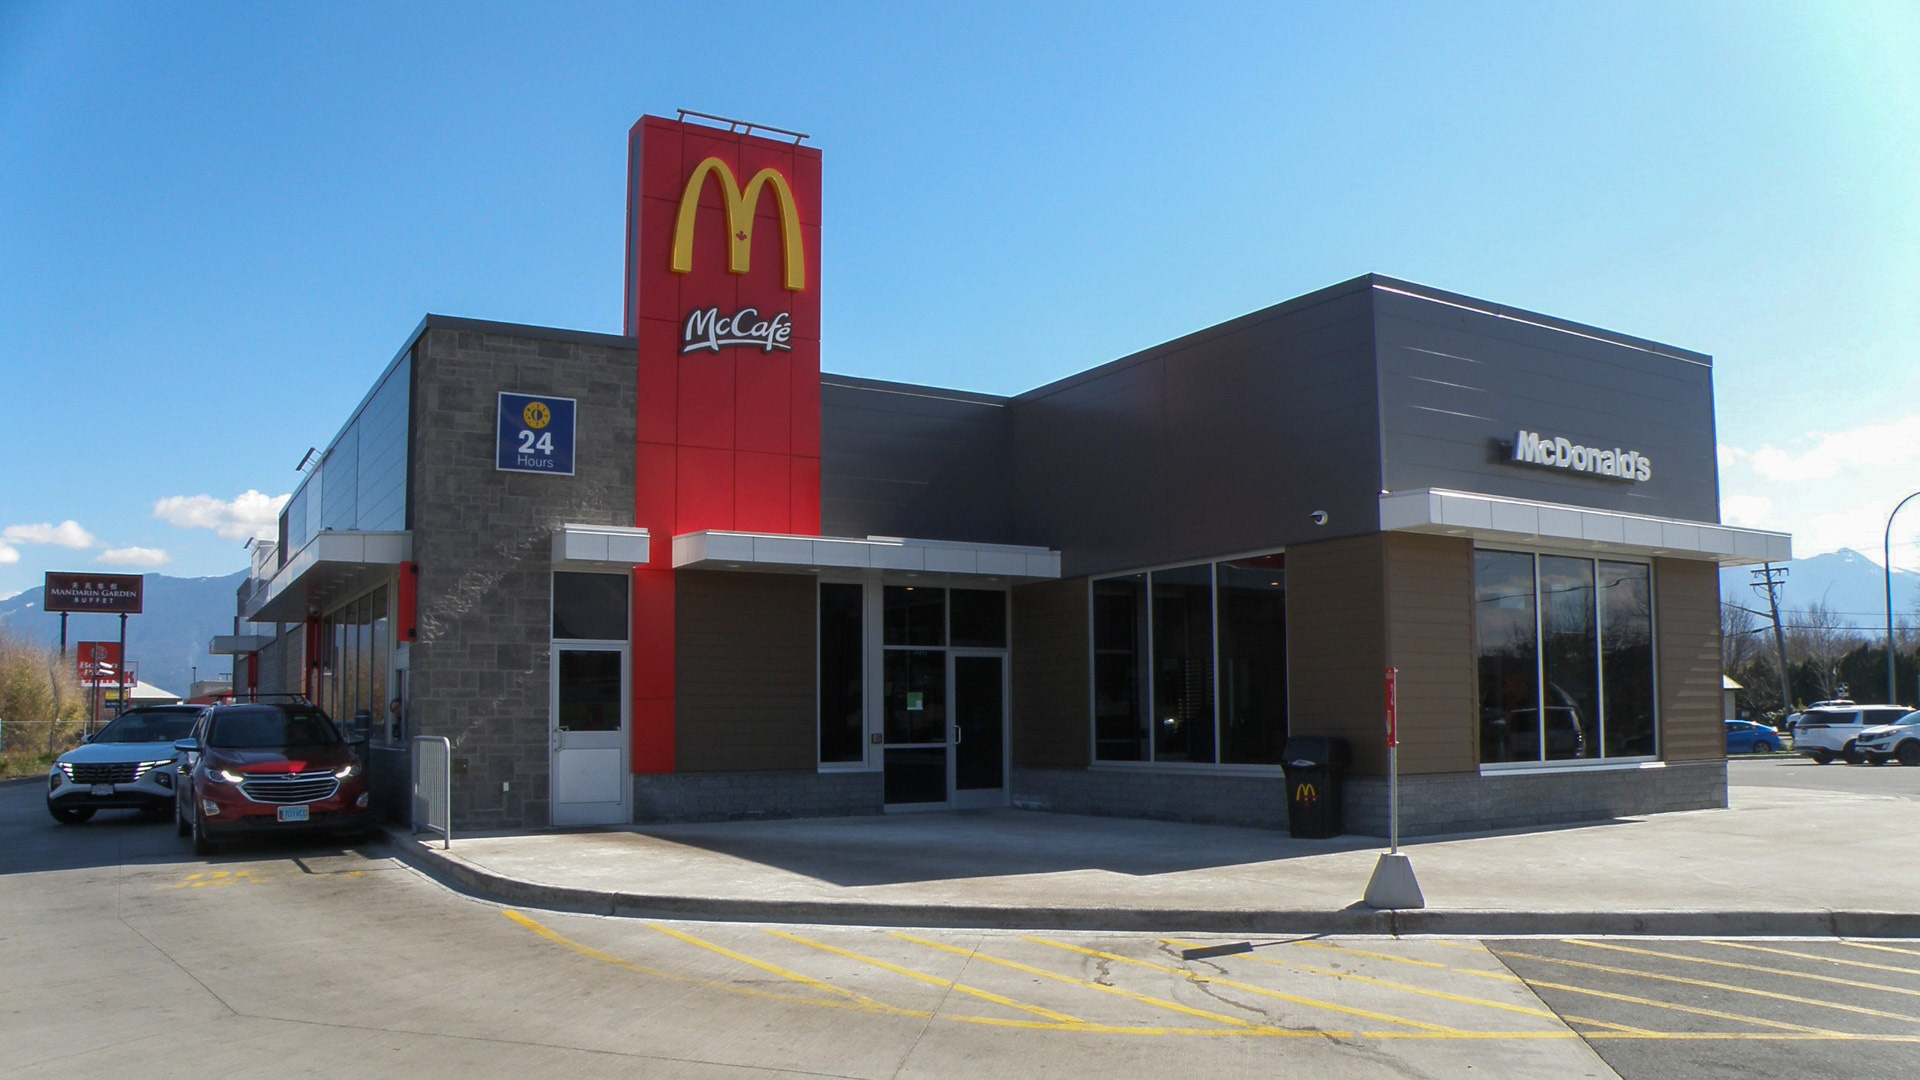 The exterior of a McDonalds restaurant showing the drive thru